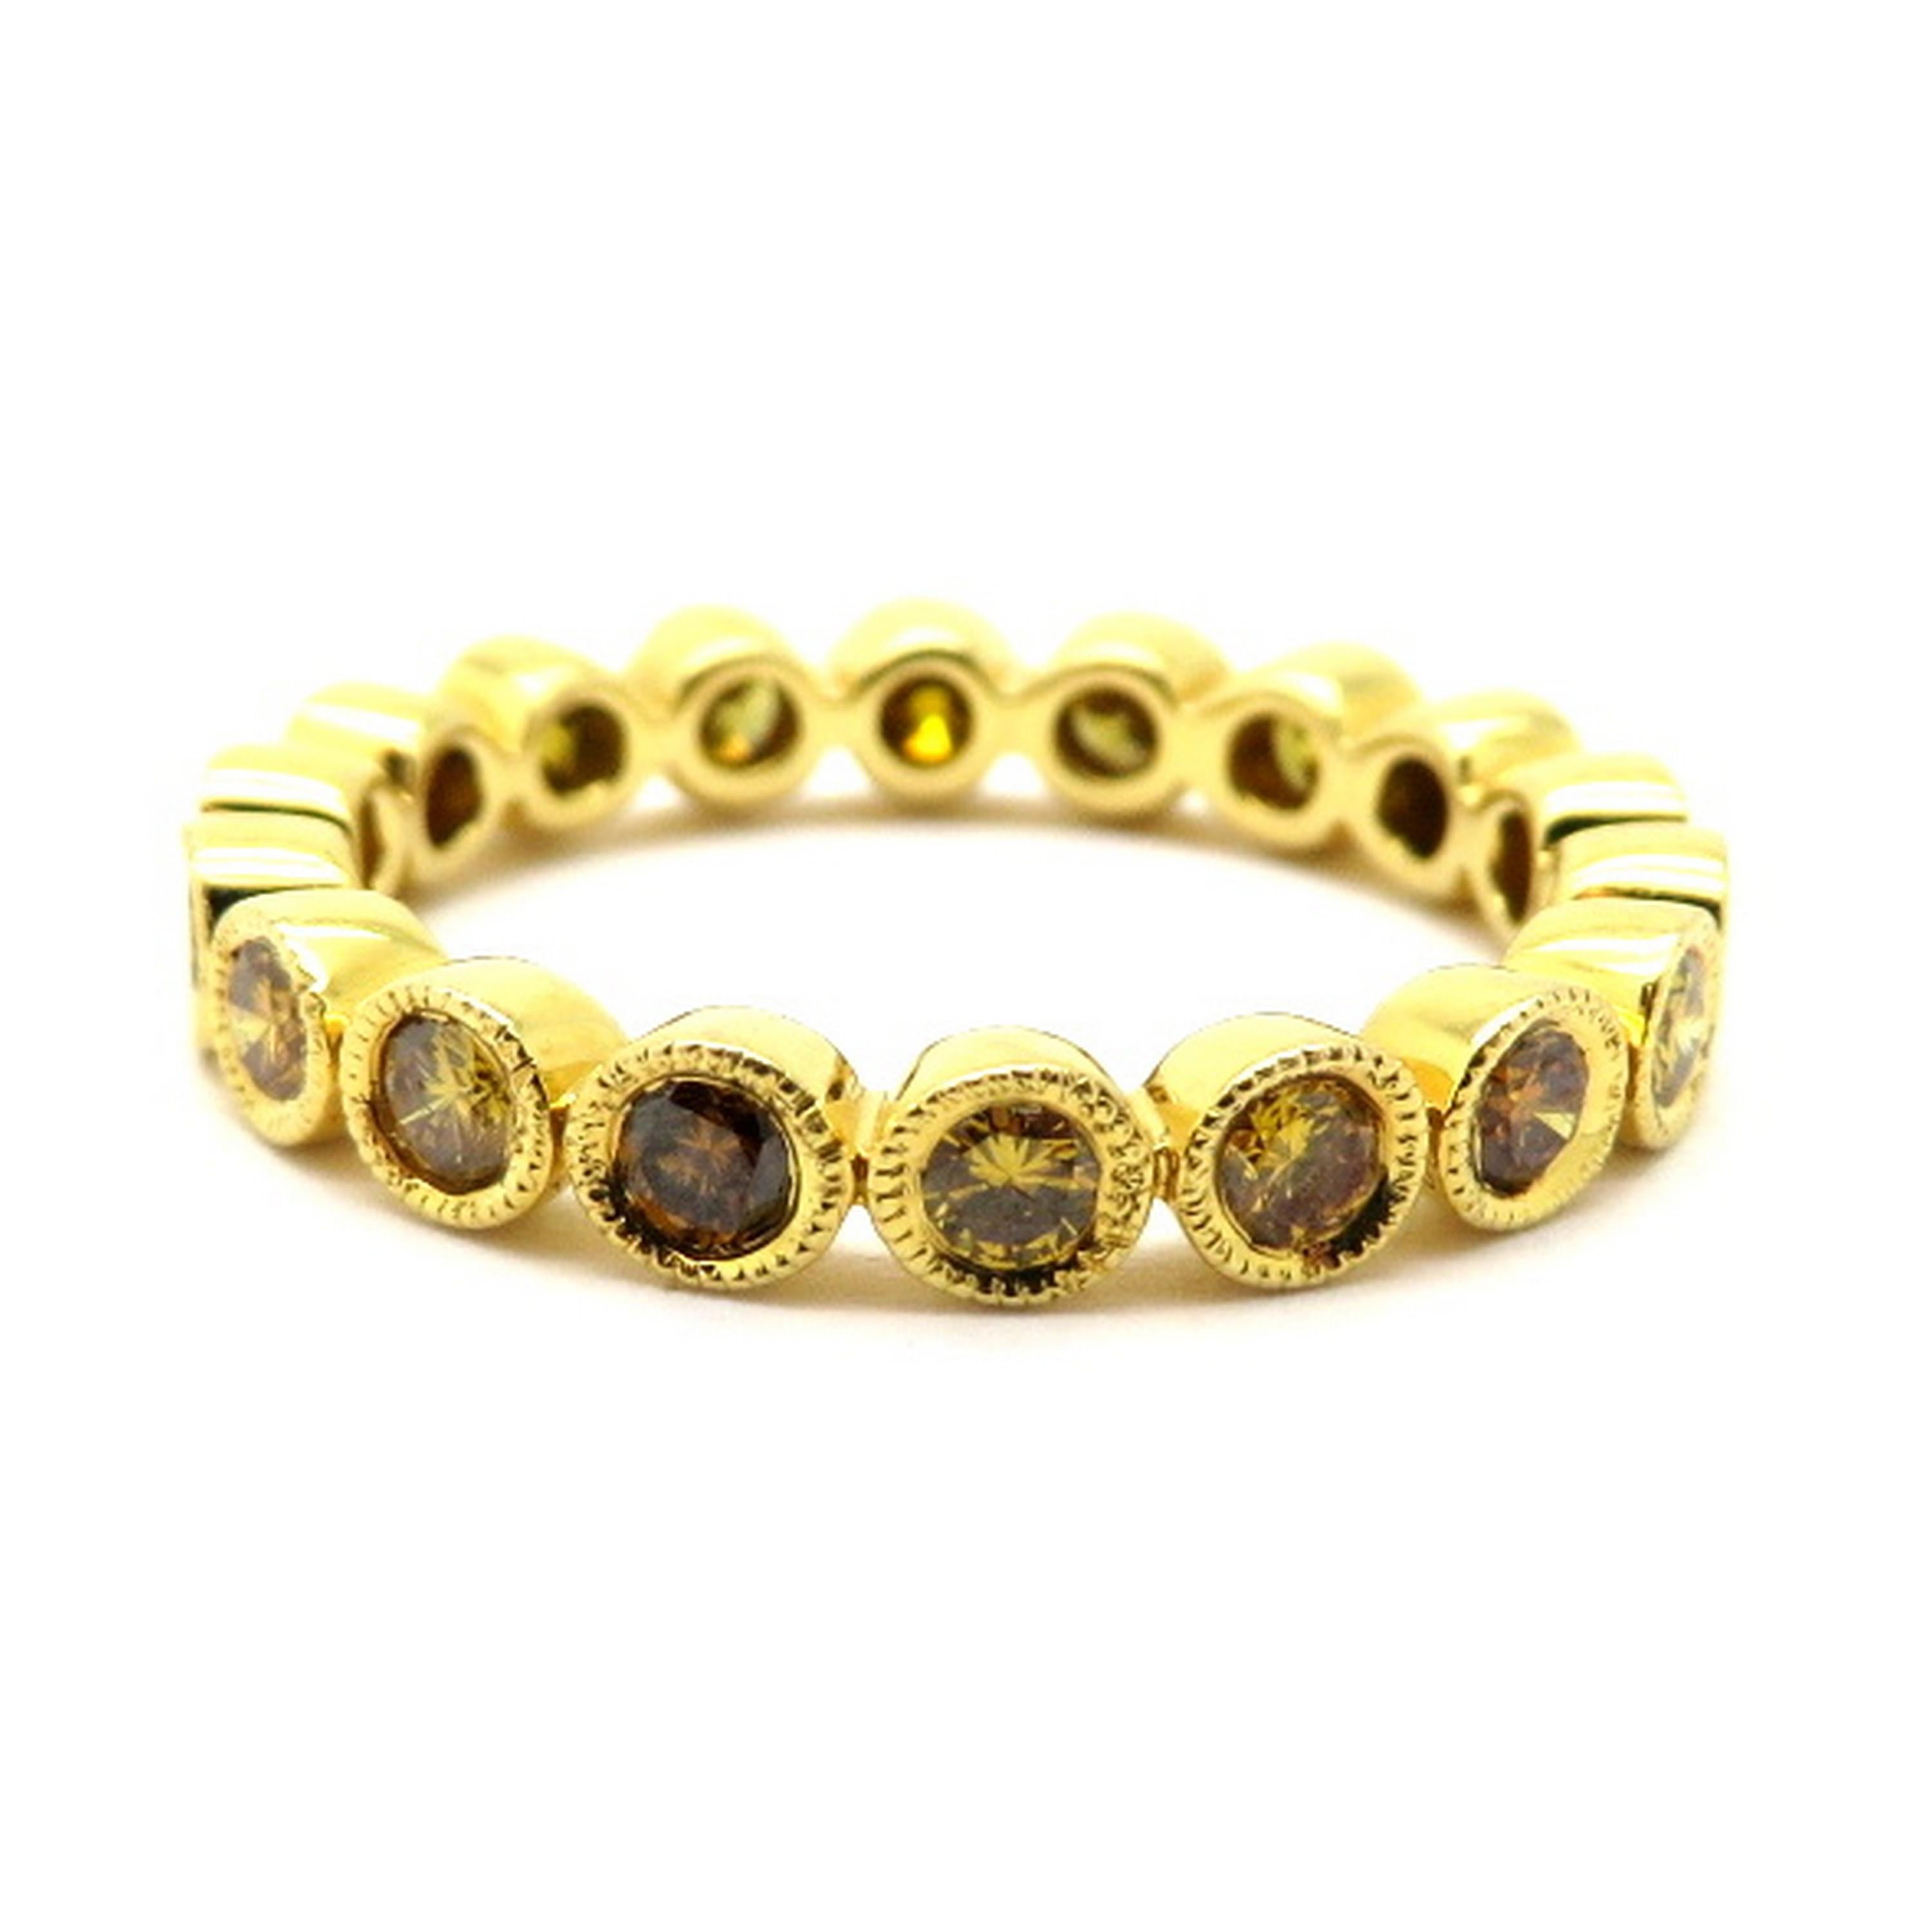 Estate 18K yellow gold fancy yellowish orange round diamond eternity band ring. Showcasing 18 round brilliant cut fancy yellowish orange diamonds weighing a combined total of approximately 0.98 carats. Clarity grade: SI1. The ring is crafted out of